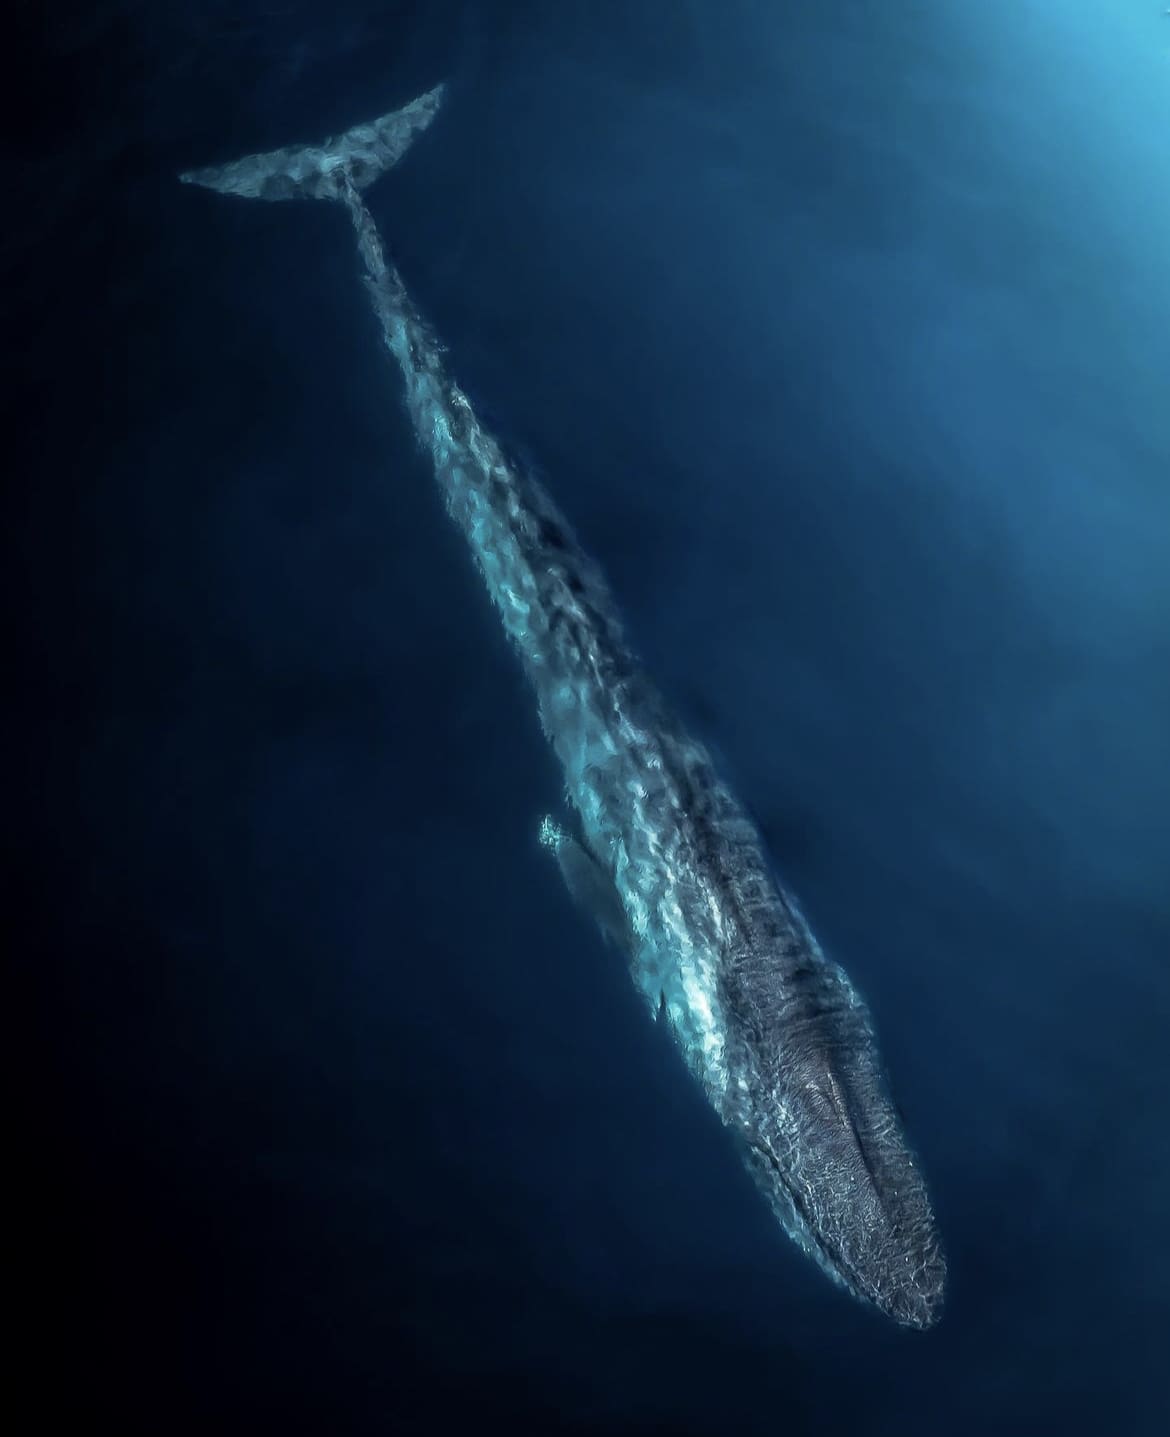 Blue whale dives into the deep of the ocean in Western Australia